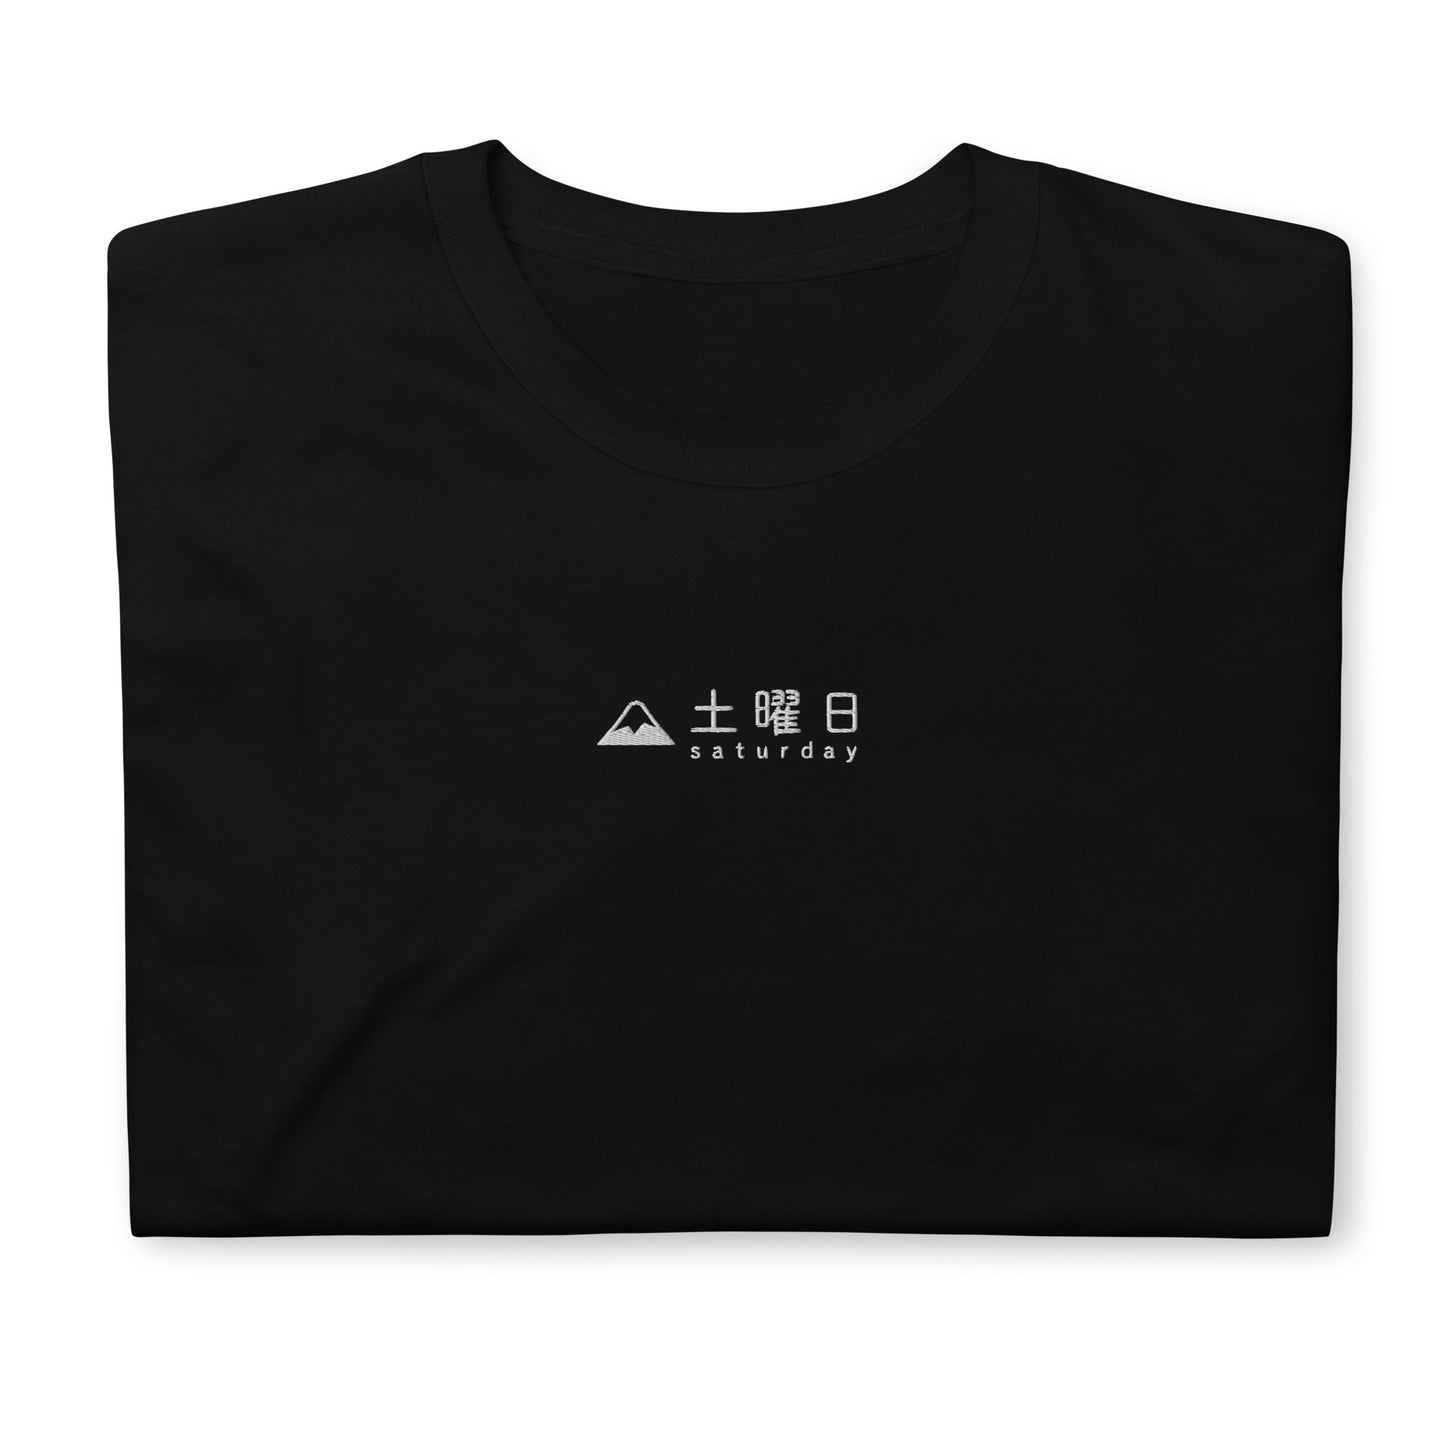 Black High Quality Tee - Front Design with an Black Embroidery "Saturday" in Japanese and English